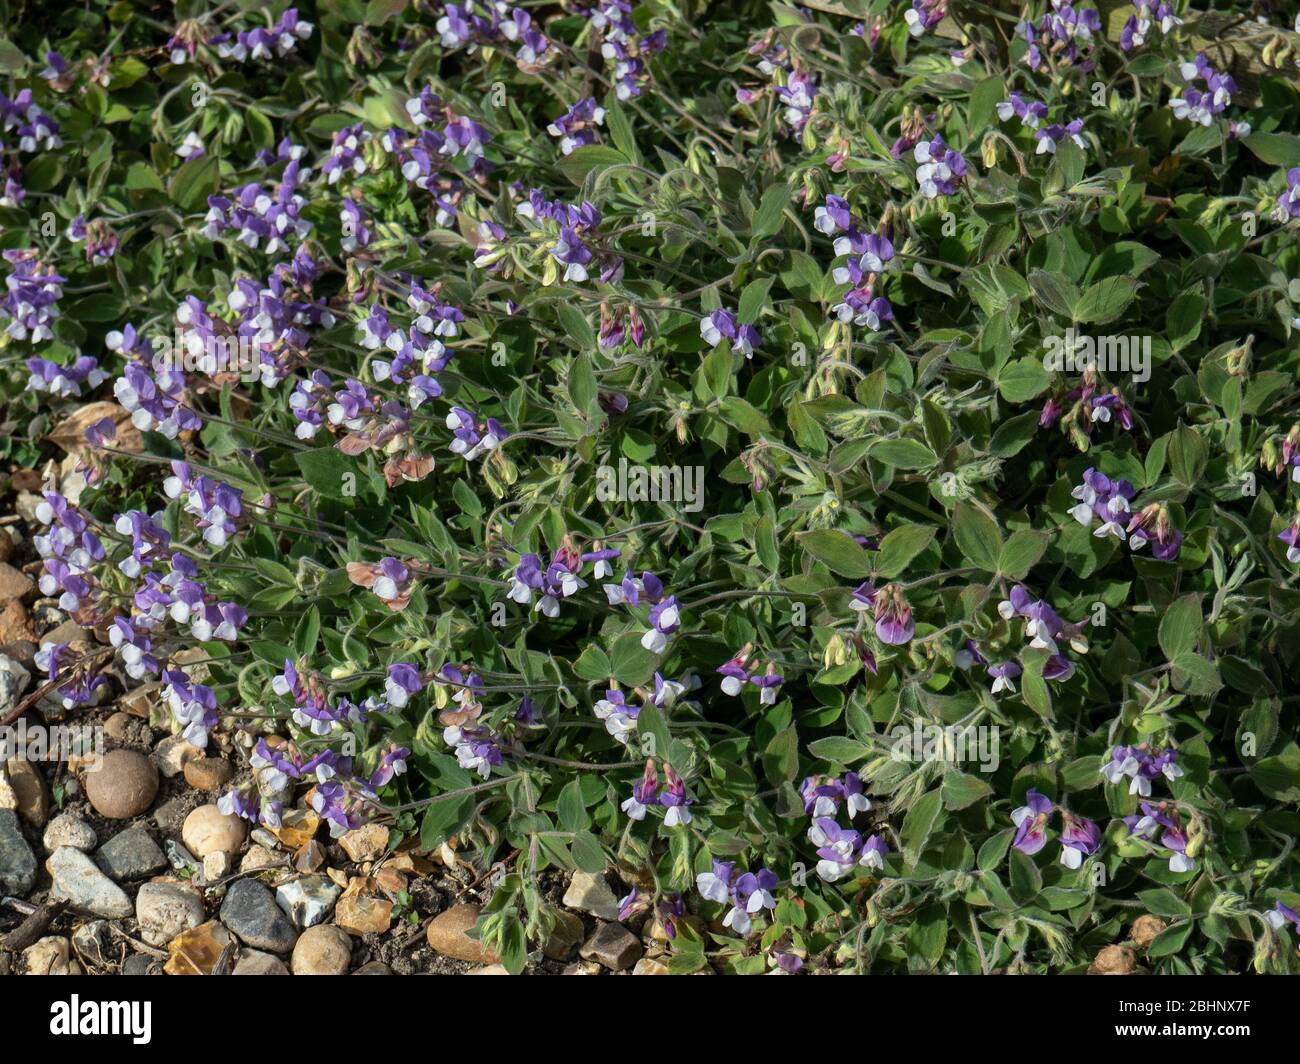 A plant of the lavender and white Lathyrus laxiflorus spreading across a gravel area Stock Photo